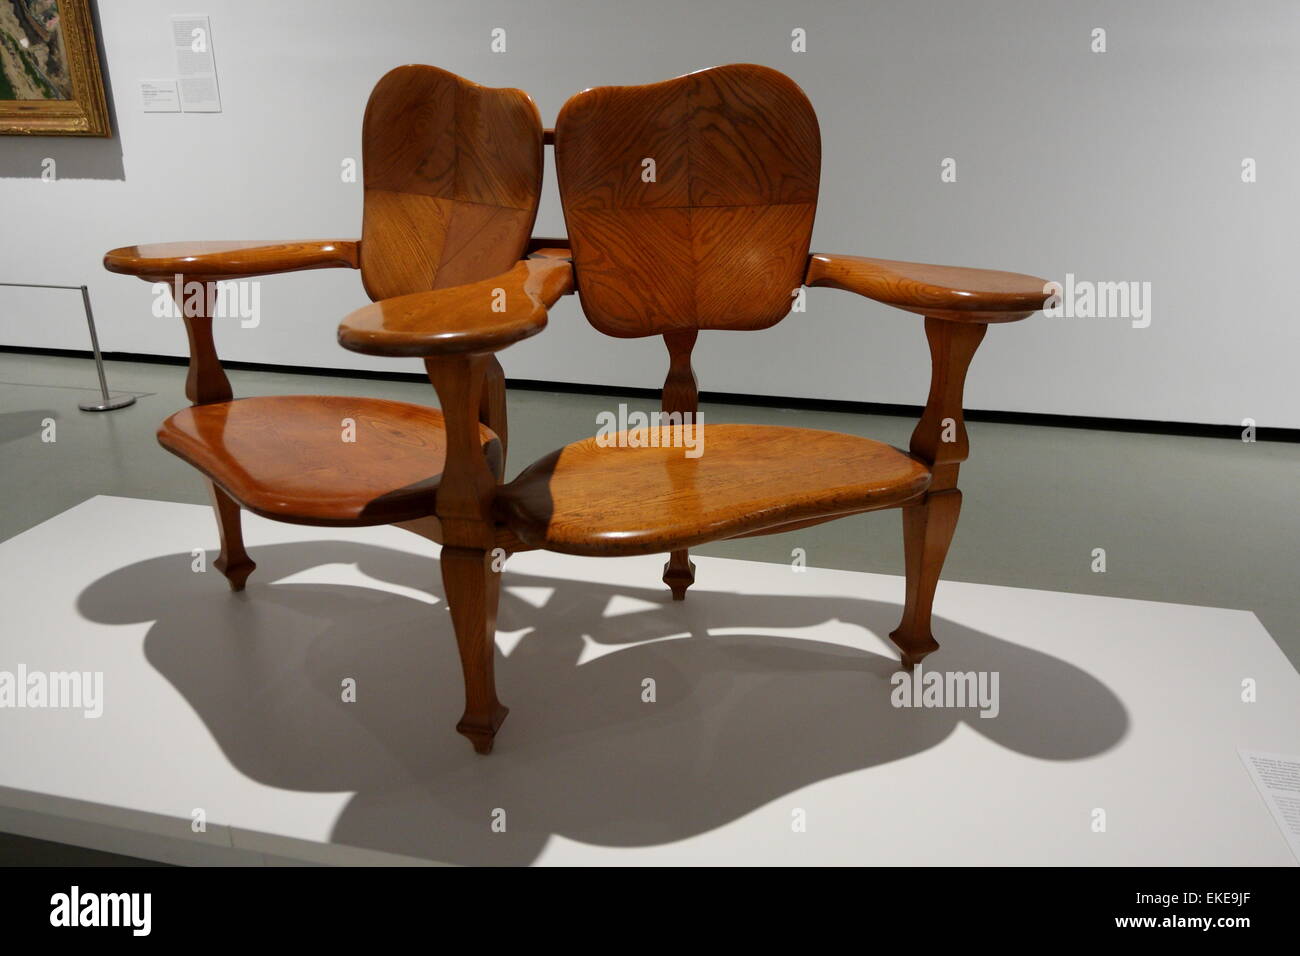 Modernisme furniture by Antoni Gaudi in the National Art Museum of Catalonia (MNAC) Barcelona, Spain, August 2014 Stock Photo